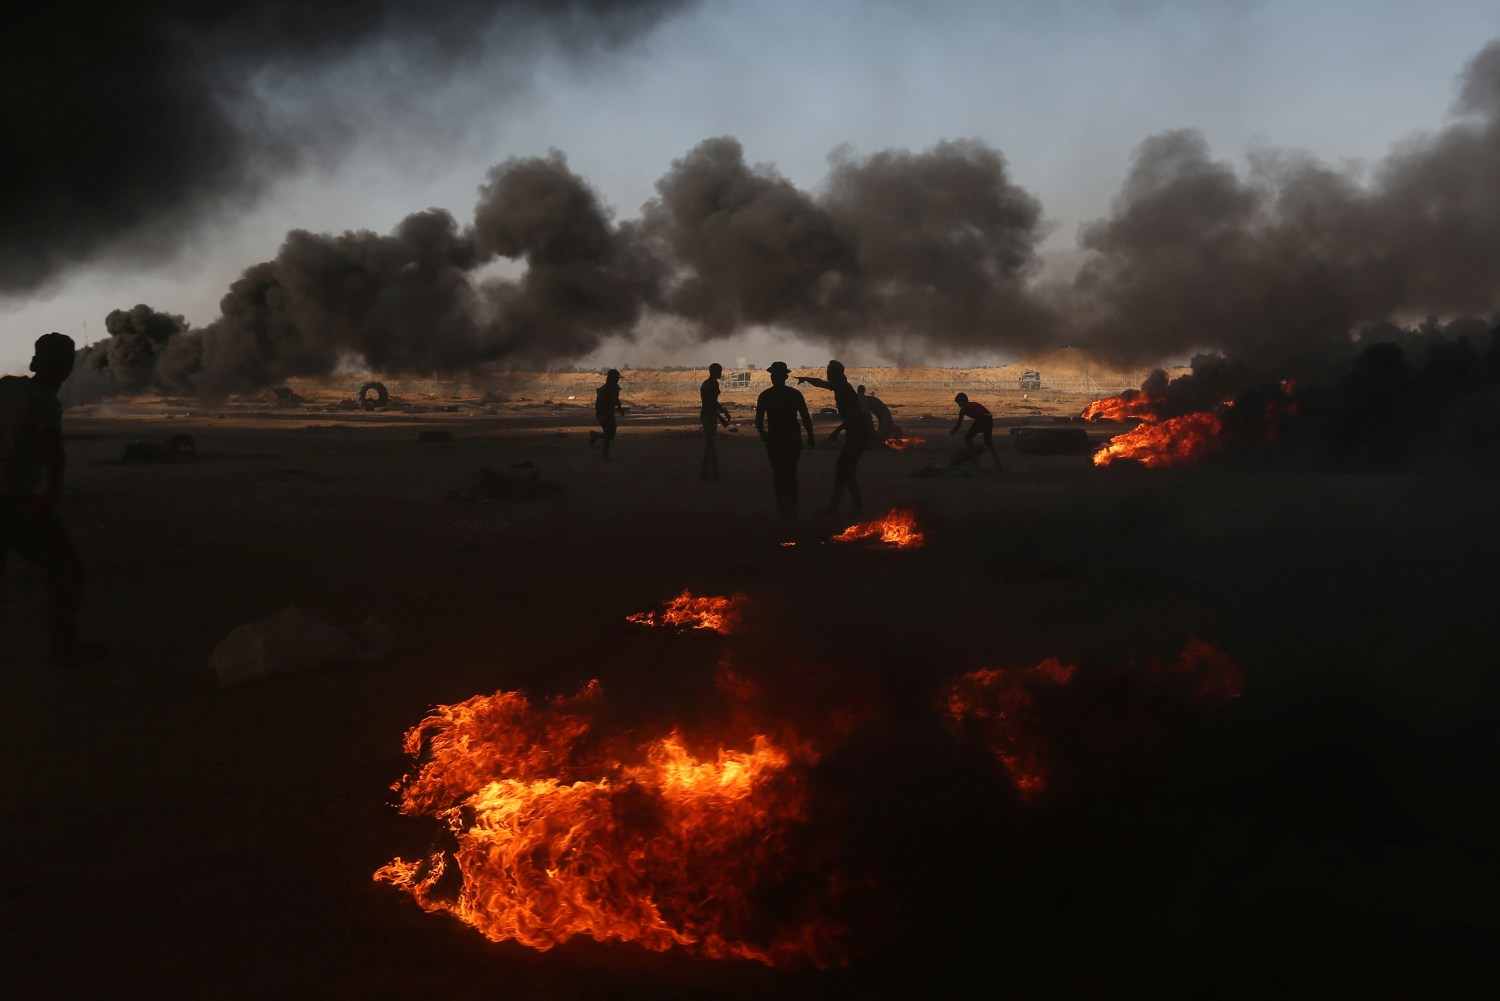 Palestinian demonstrators are seen as smoke rises from burning tires during a protest marking the 70th anniversary of Nakba, at the Israel-Gaza border in the southern Gaza Strip May 15, 2018. REUTERS/Ibraheem Abu Mustafa     TPX IMAGES OF THE DAY - RC164F7FC530